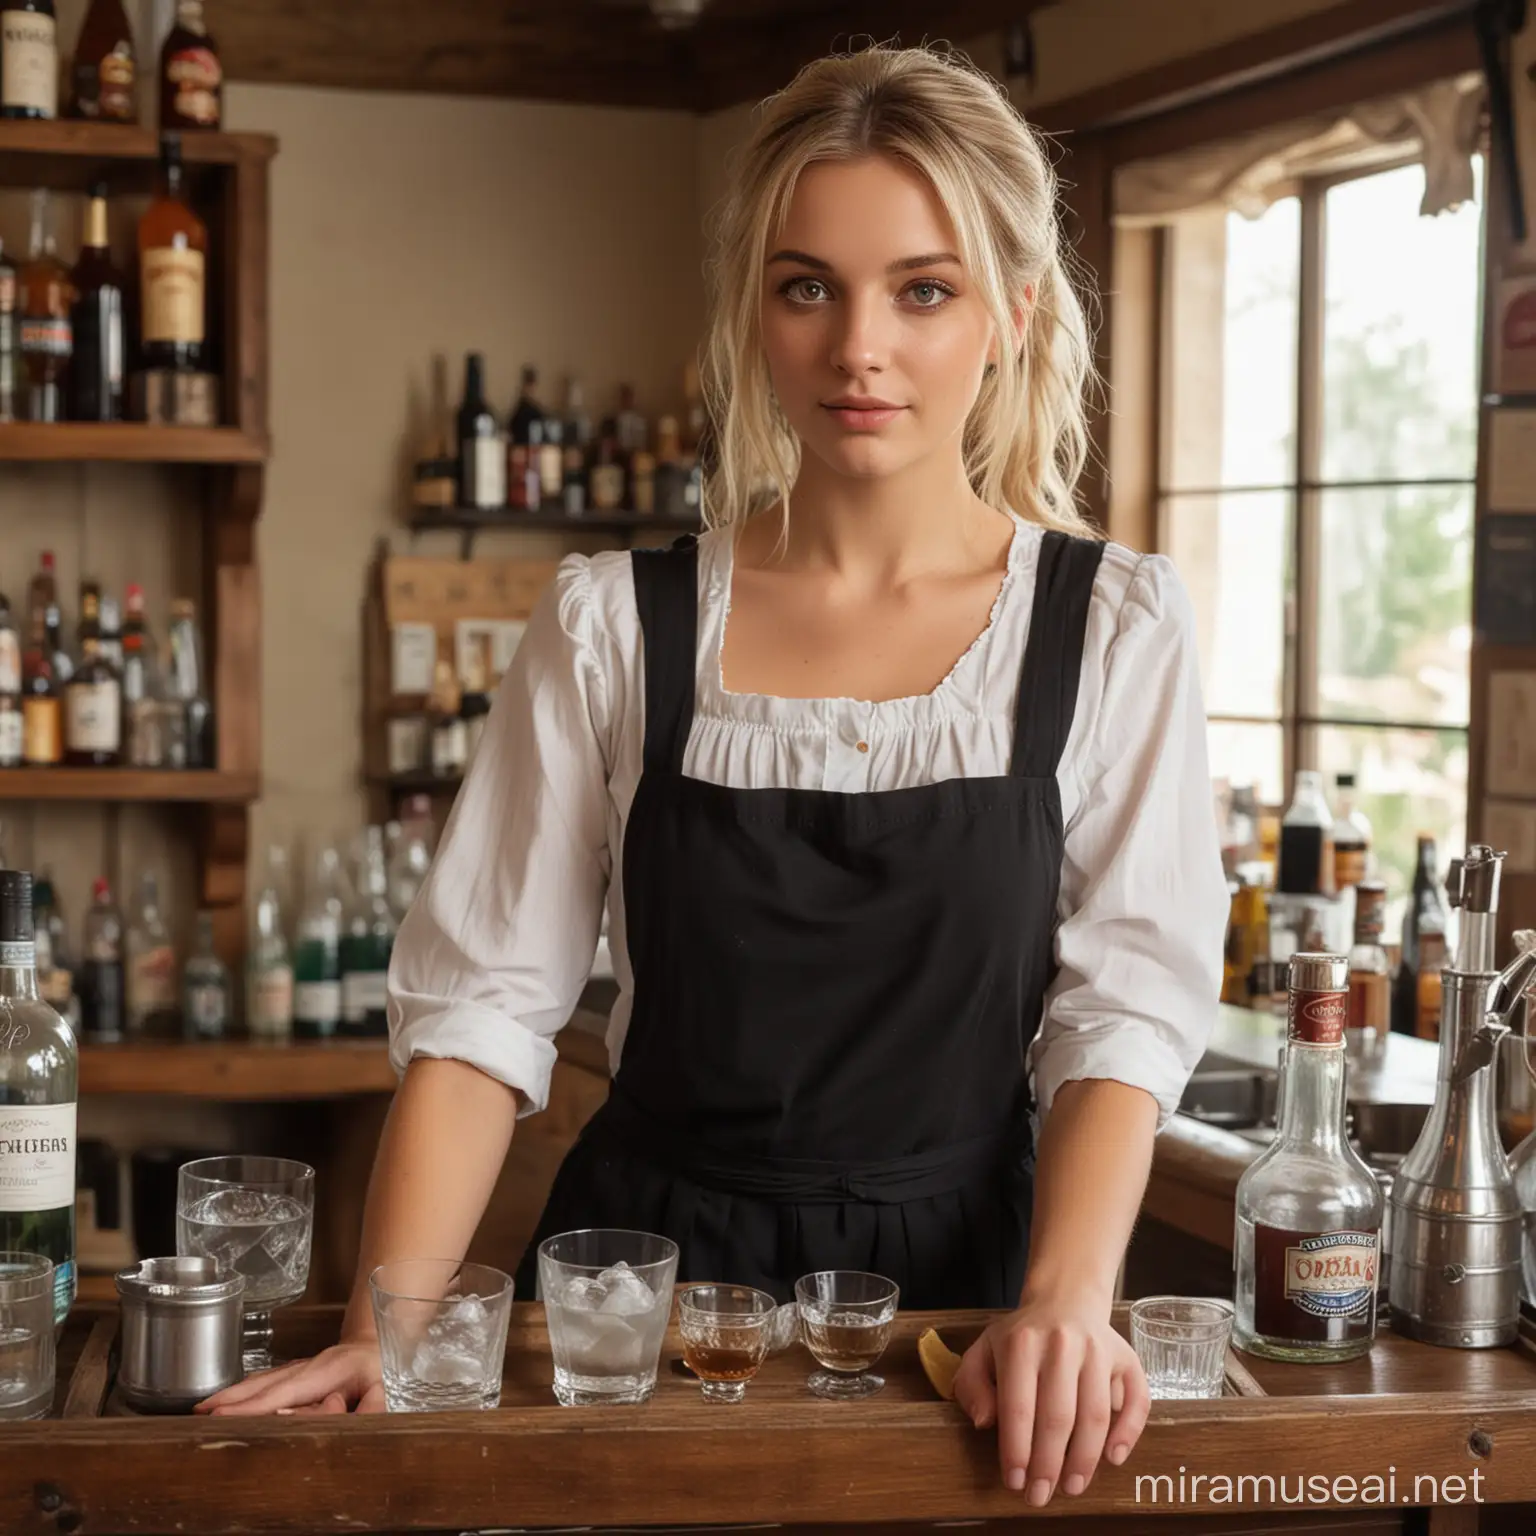 A plain looking but secretly pretty bar maiden in a fantasy tavern, threadbare apron and simple clothes, hazel eyes, blonde hair, bare feet, balancing a tray of drinks in one hand